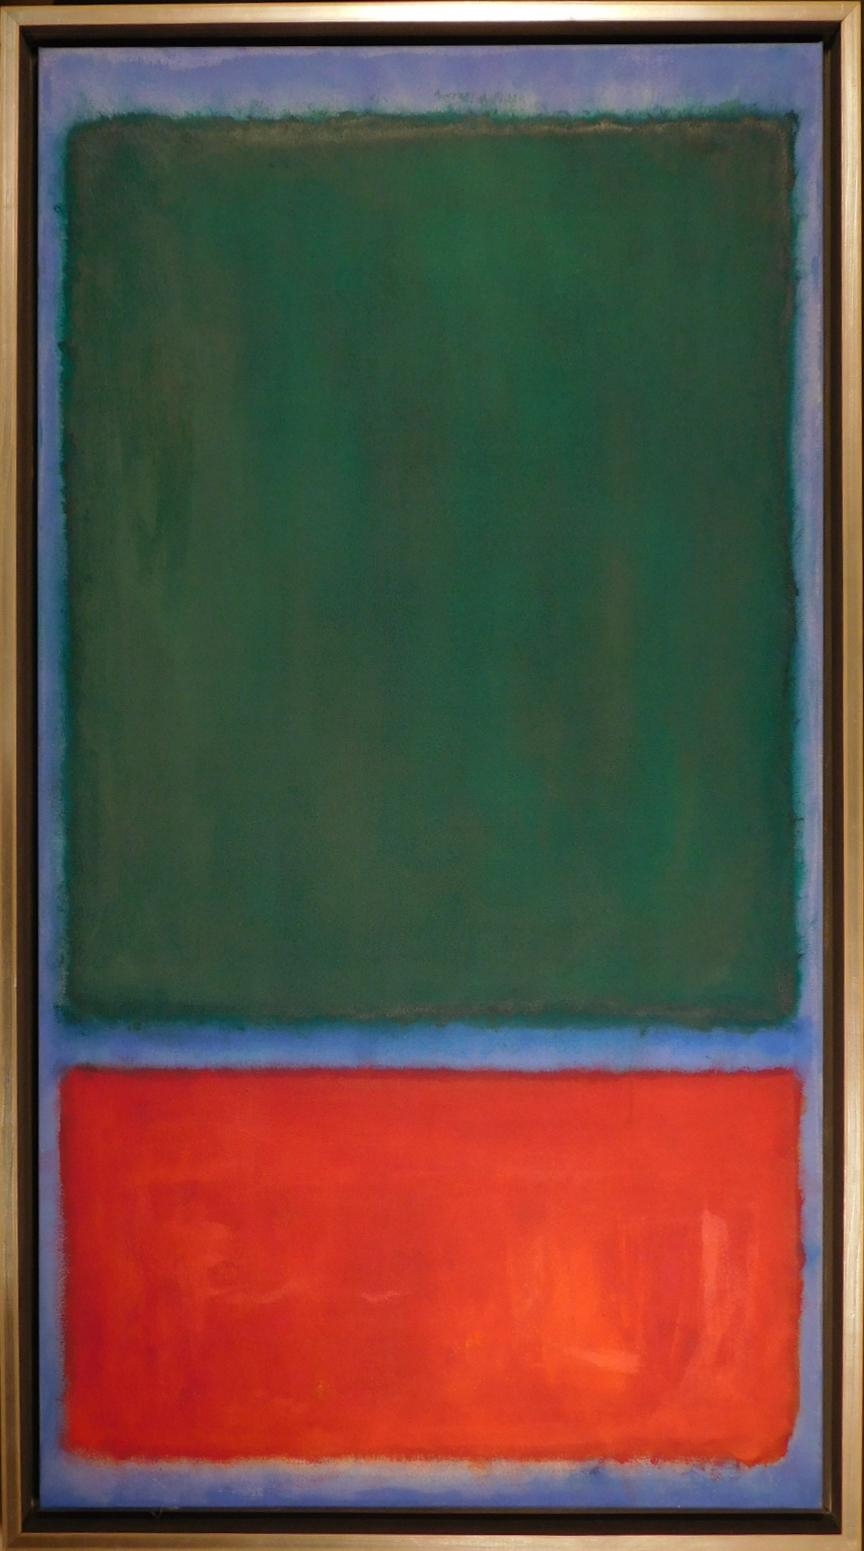 Color Field (Red, Blue, Green) by Mark Rothko